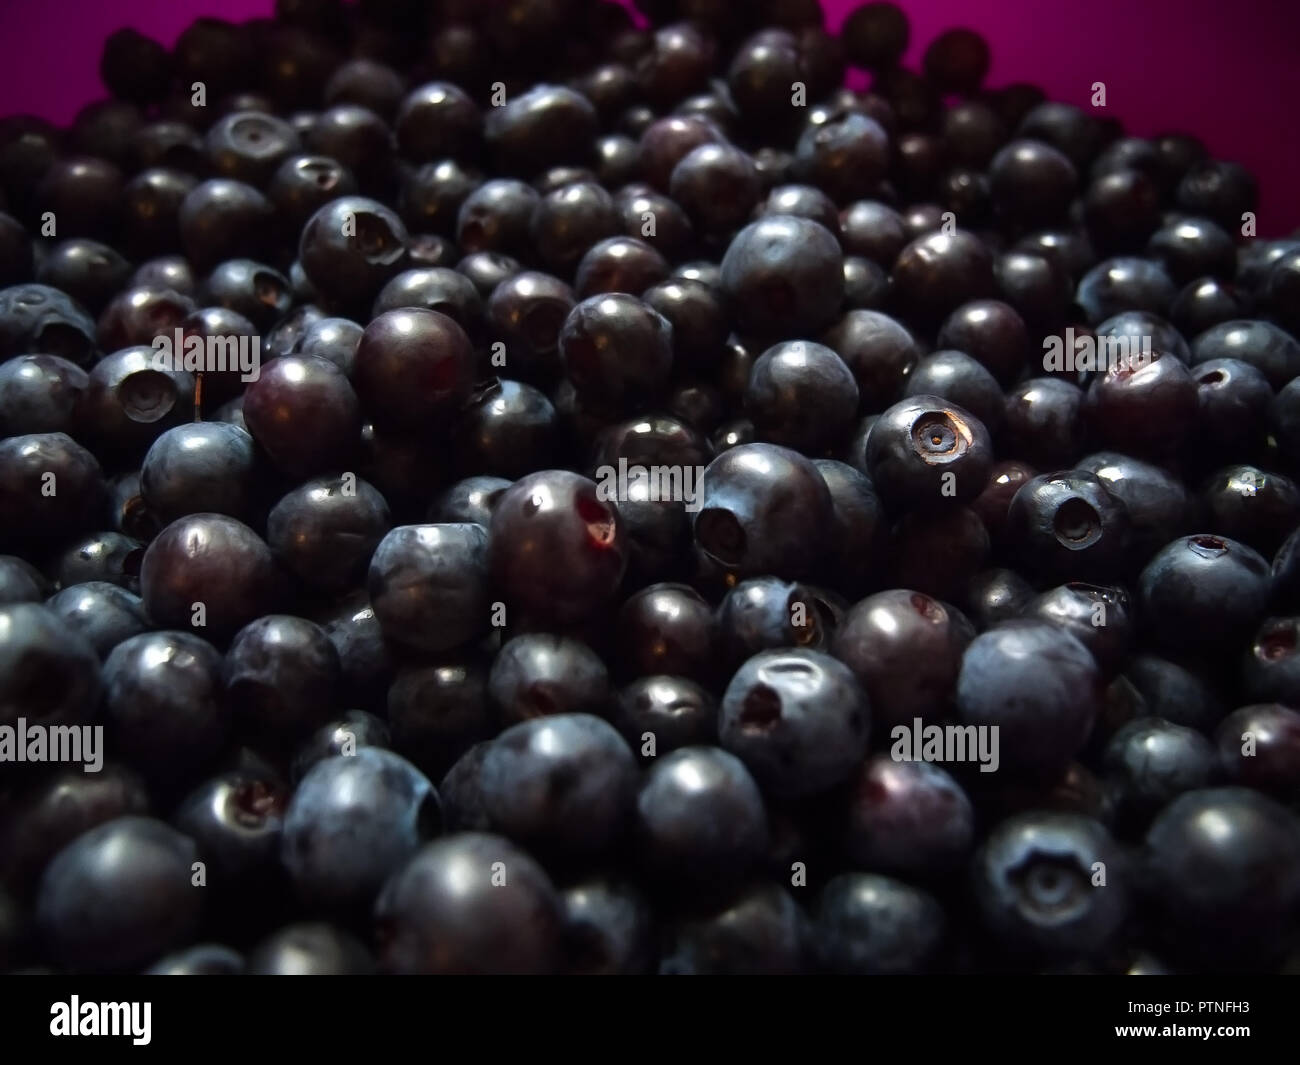 Close-up of the healthy superfood raw, organic blueberry, full of nutrition, antioxidants and vitamins Stock Photo